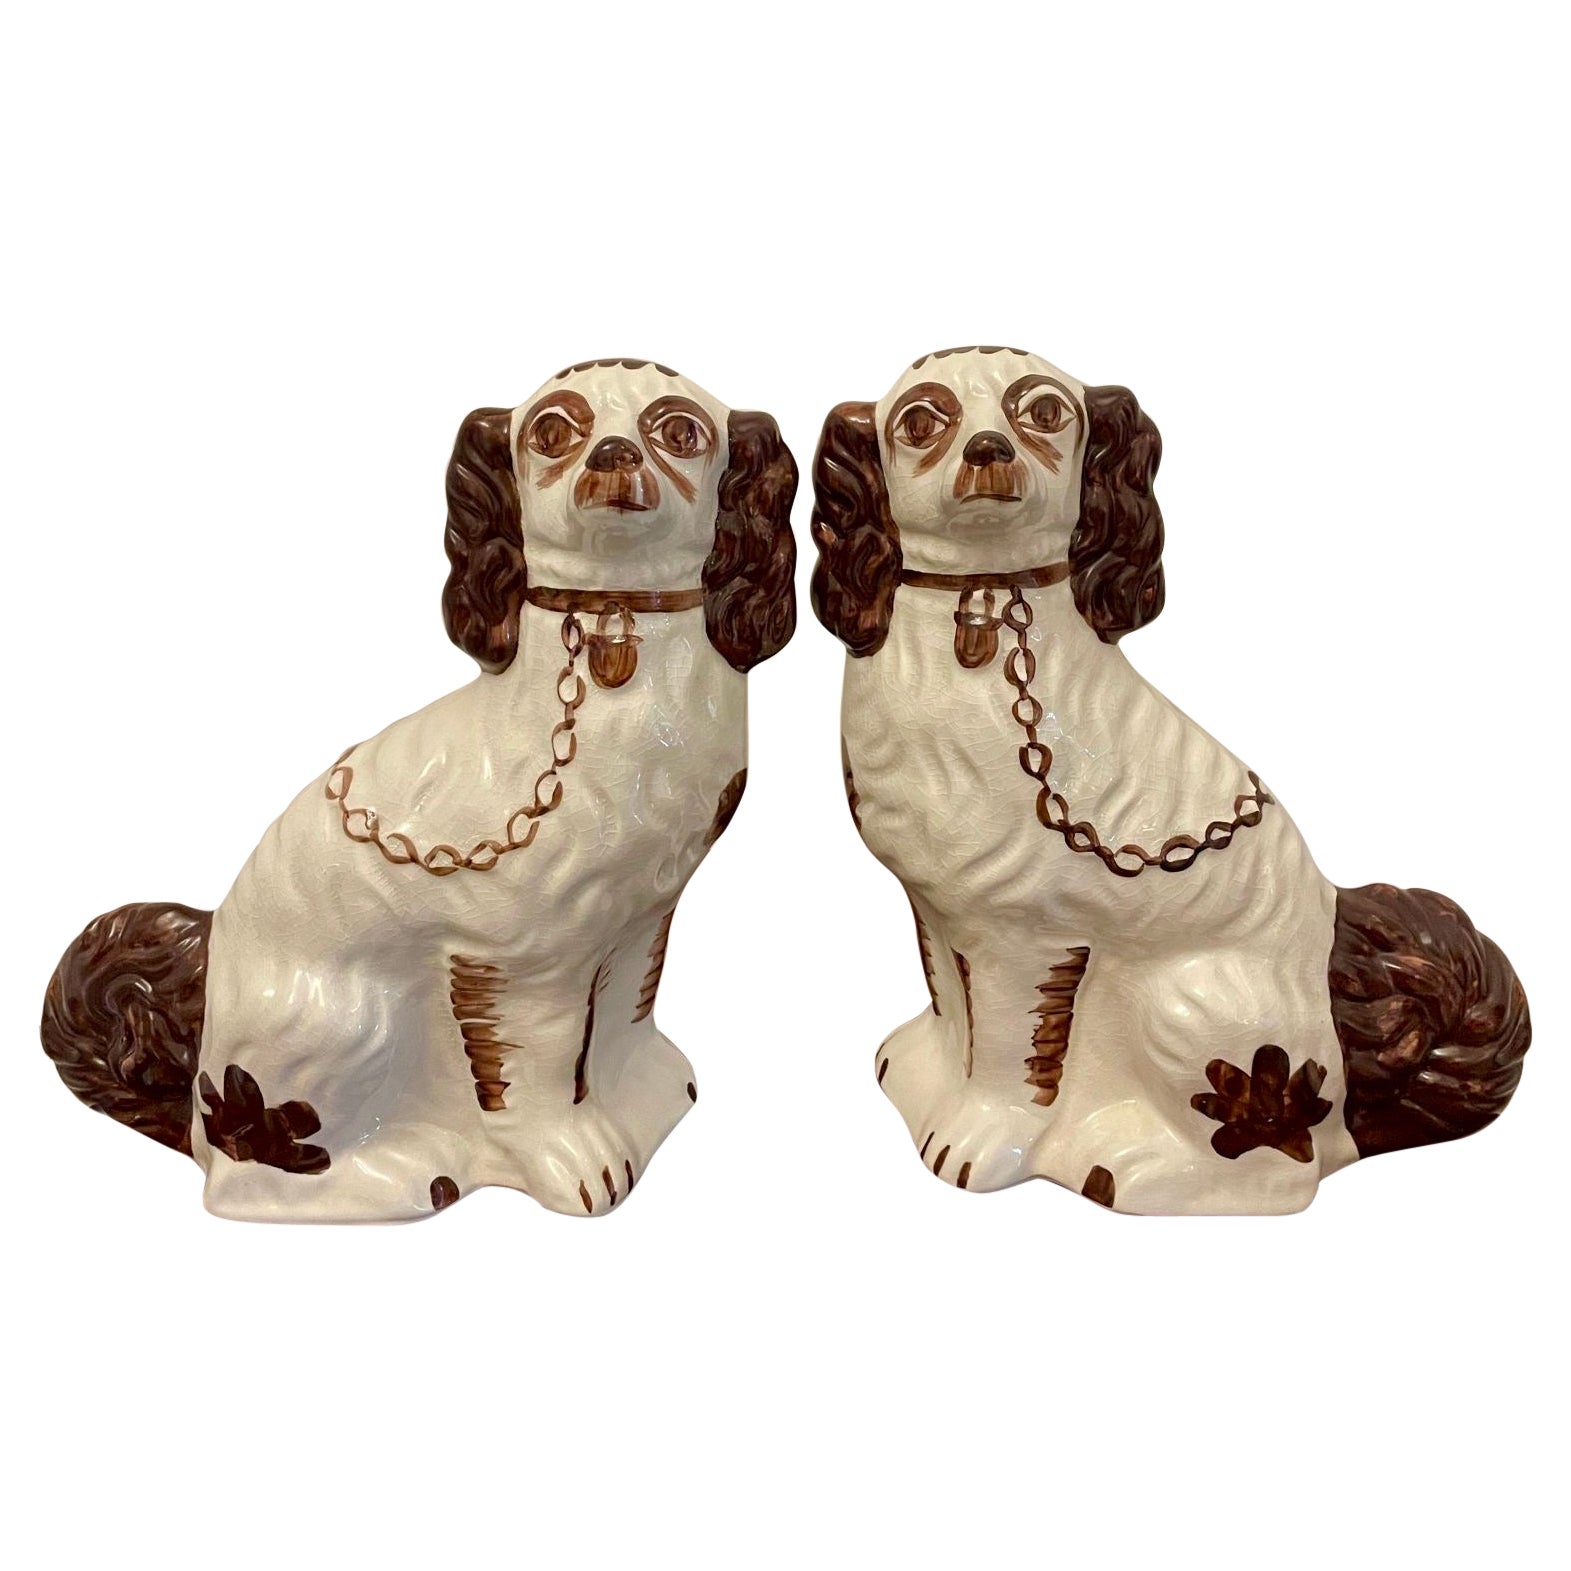 Antique Edwardian Quality Pair of Staffordshire Dogs For Sale